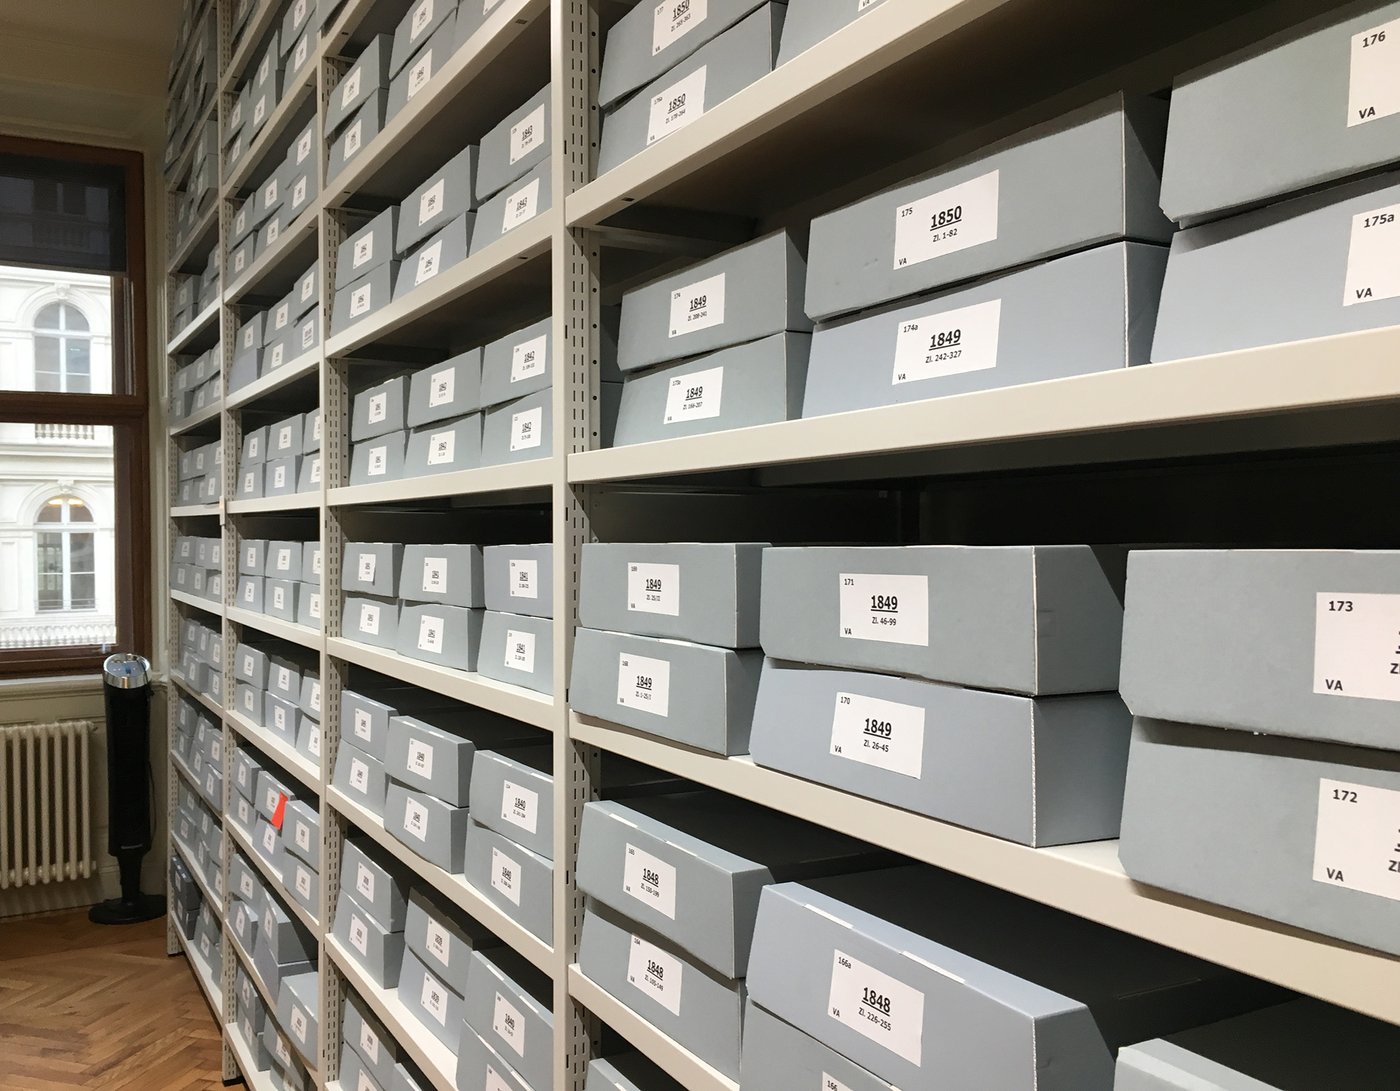 Interior view of the university archives, showing a shelf full of gray boxes, all the same size and with printed labels on them.